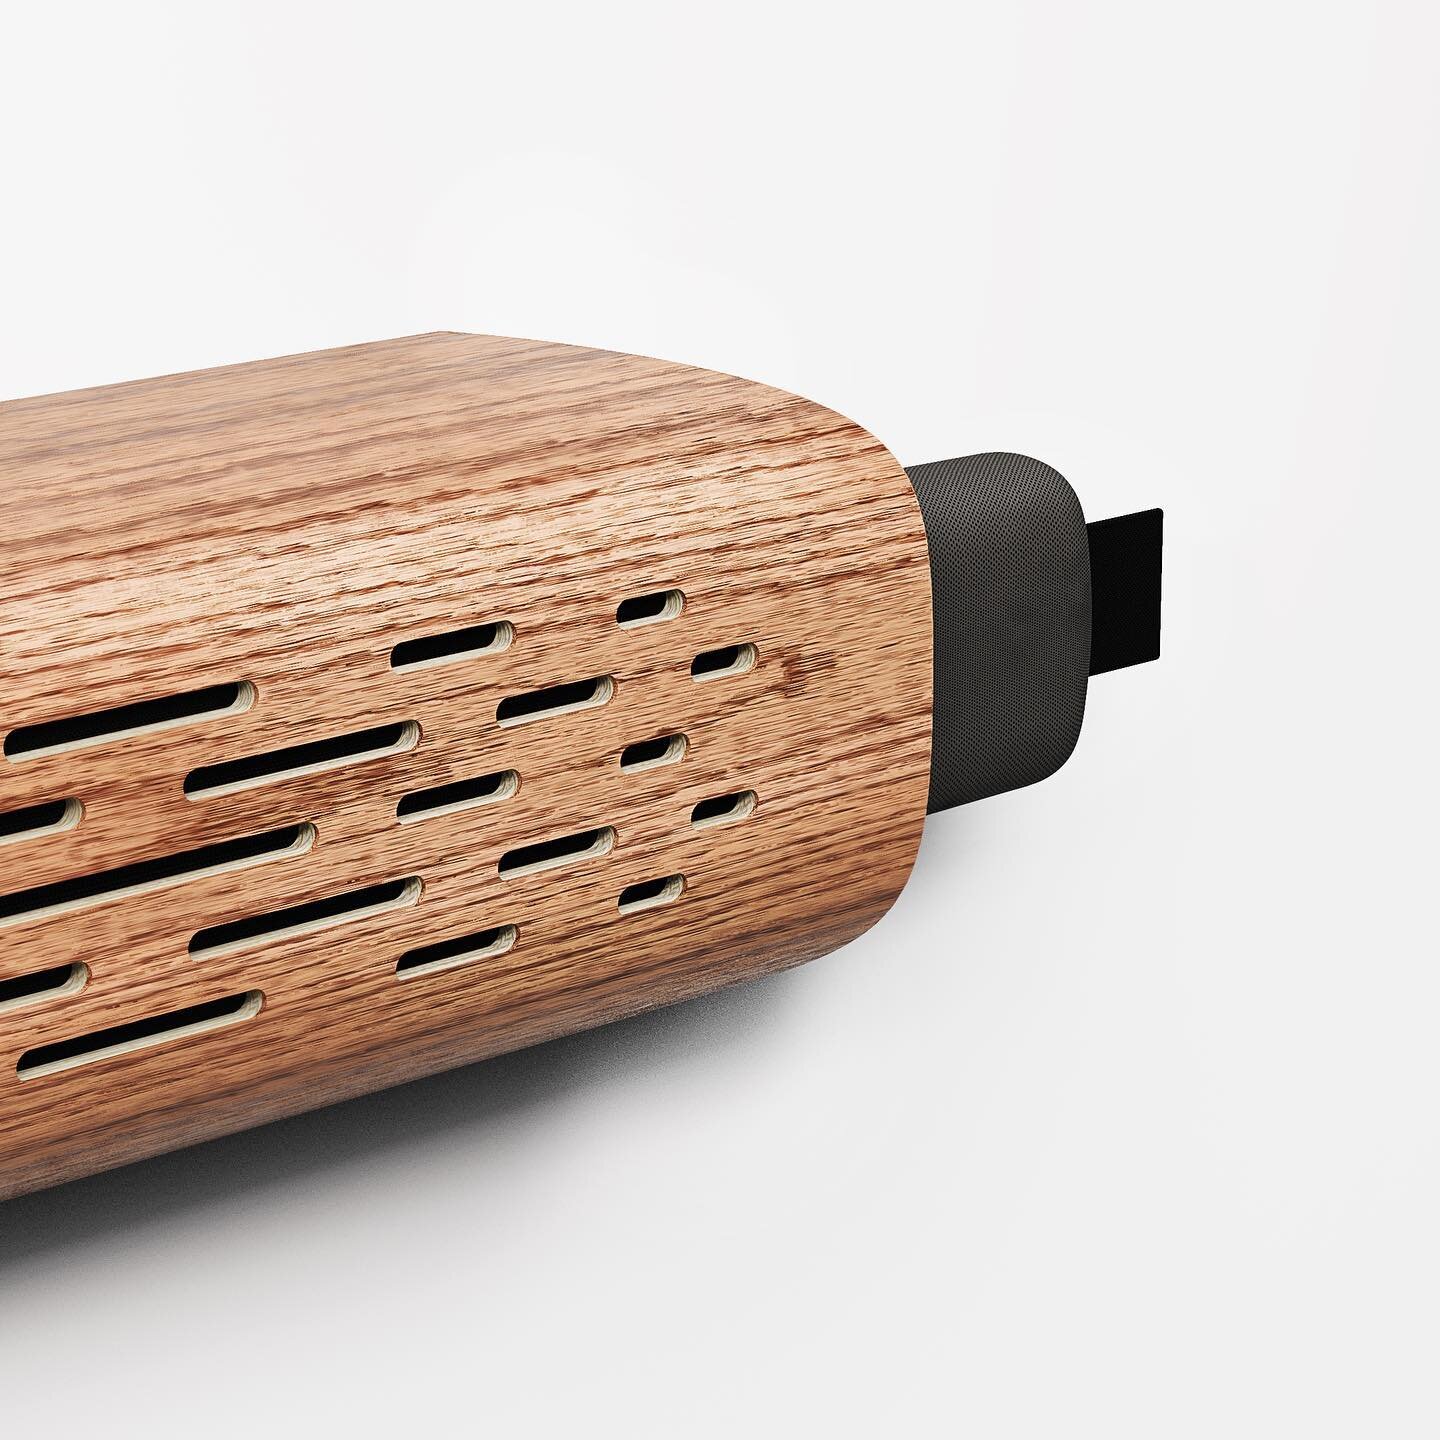 Aeris | Passive Air Purifier

Revisiting an old project - this concept uses activated bamboo charcoal and naturally occurring air currentsin the home to filter out impurities from the air without use of fans, motors, or electricity. 

#industrialdesi